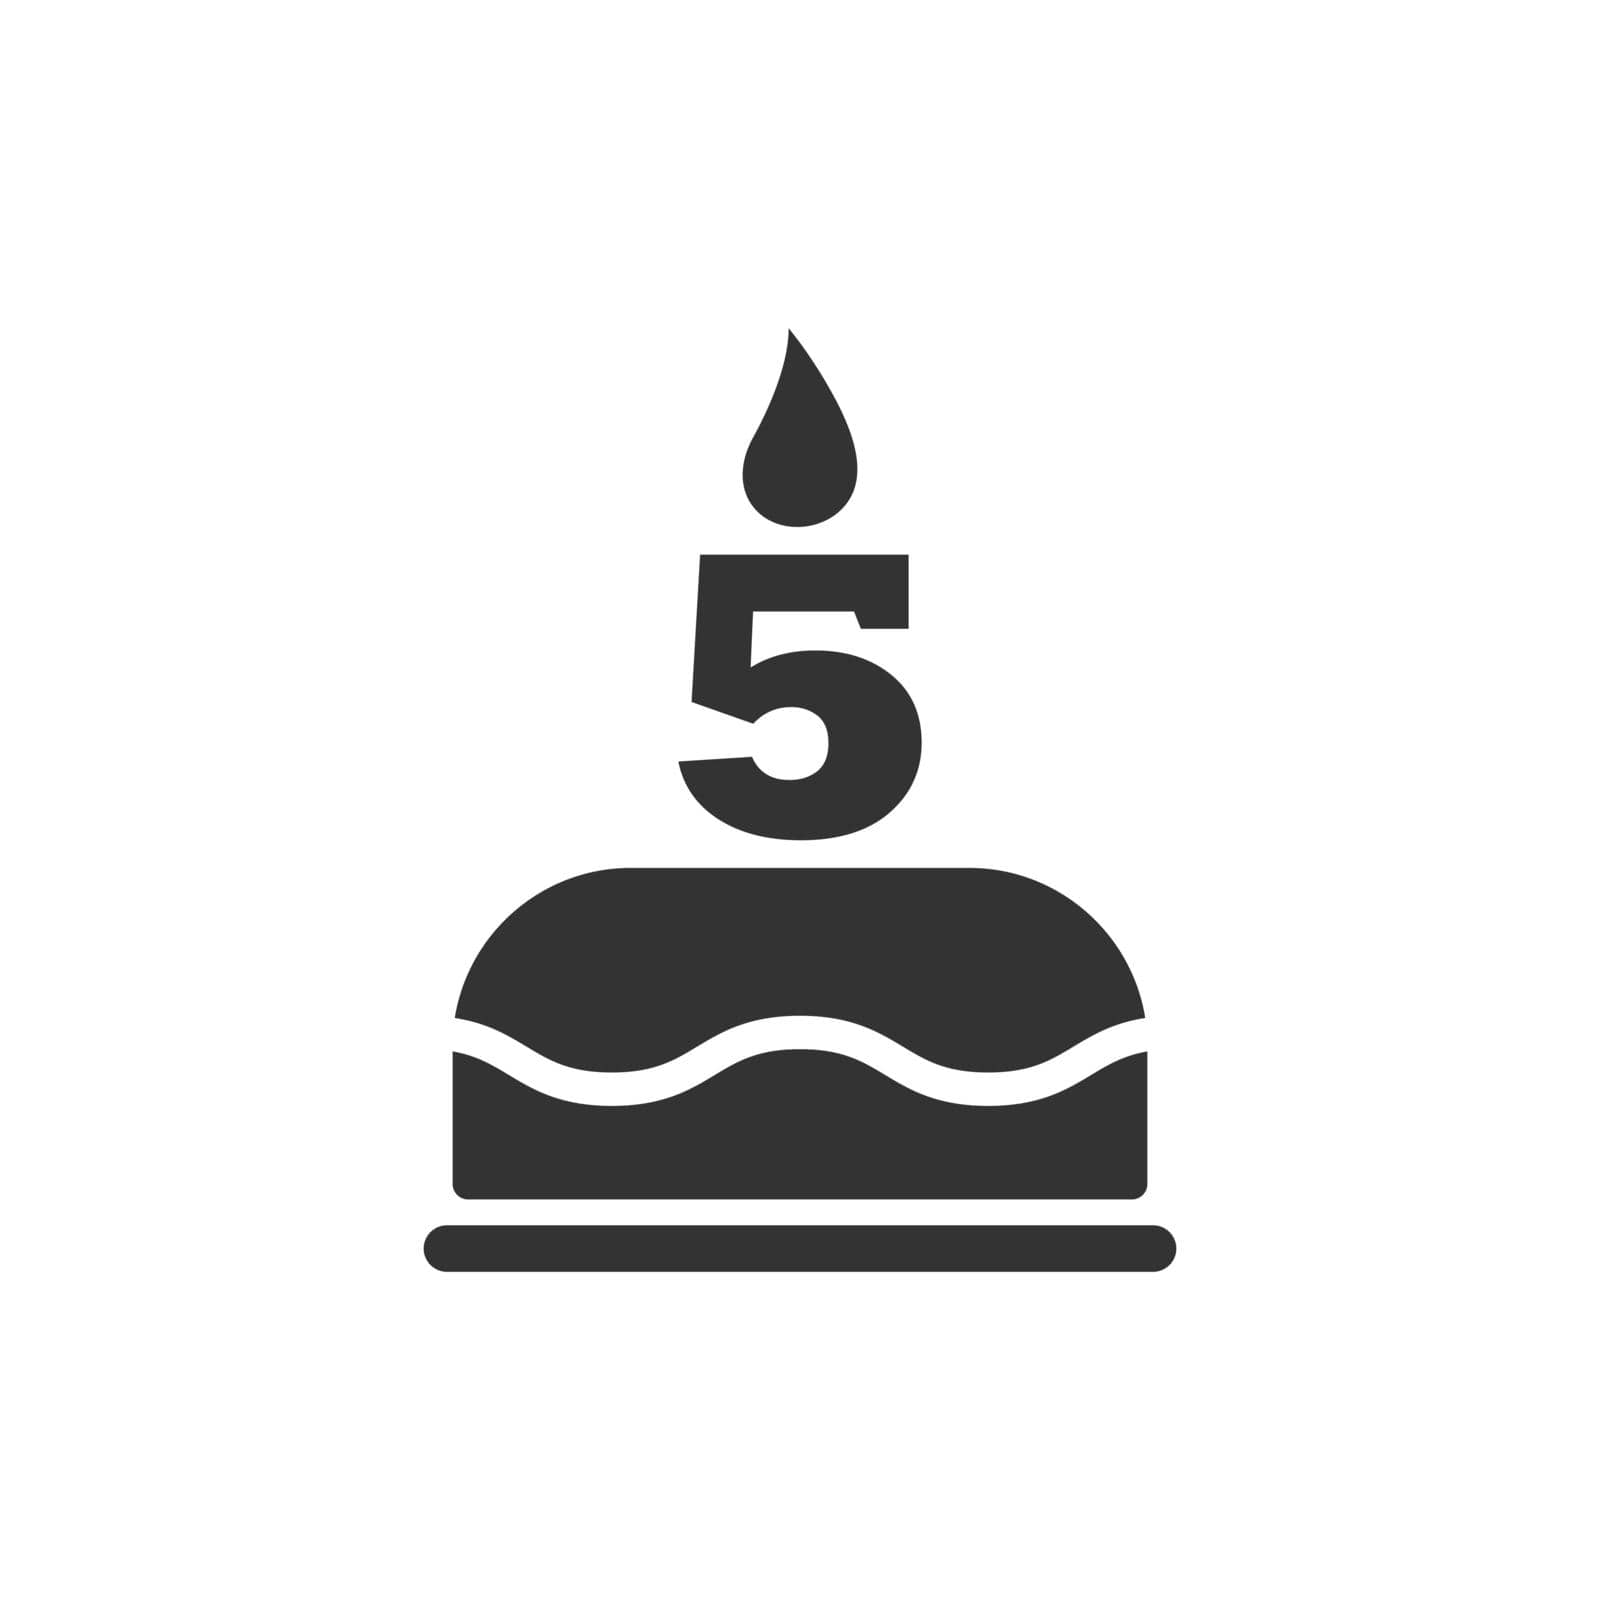 Happy fifth birthday icon. Cake with a candle in the form of the number 5. Vector symbol EPS 10 by TopRated